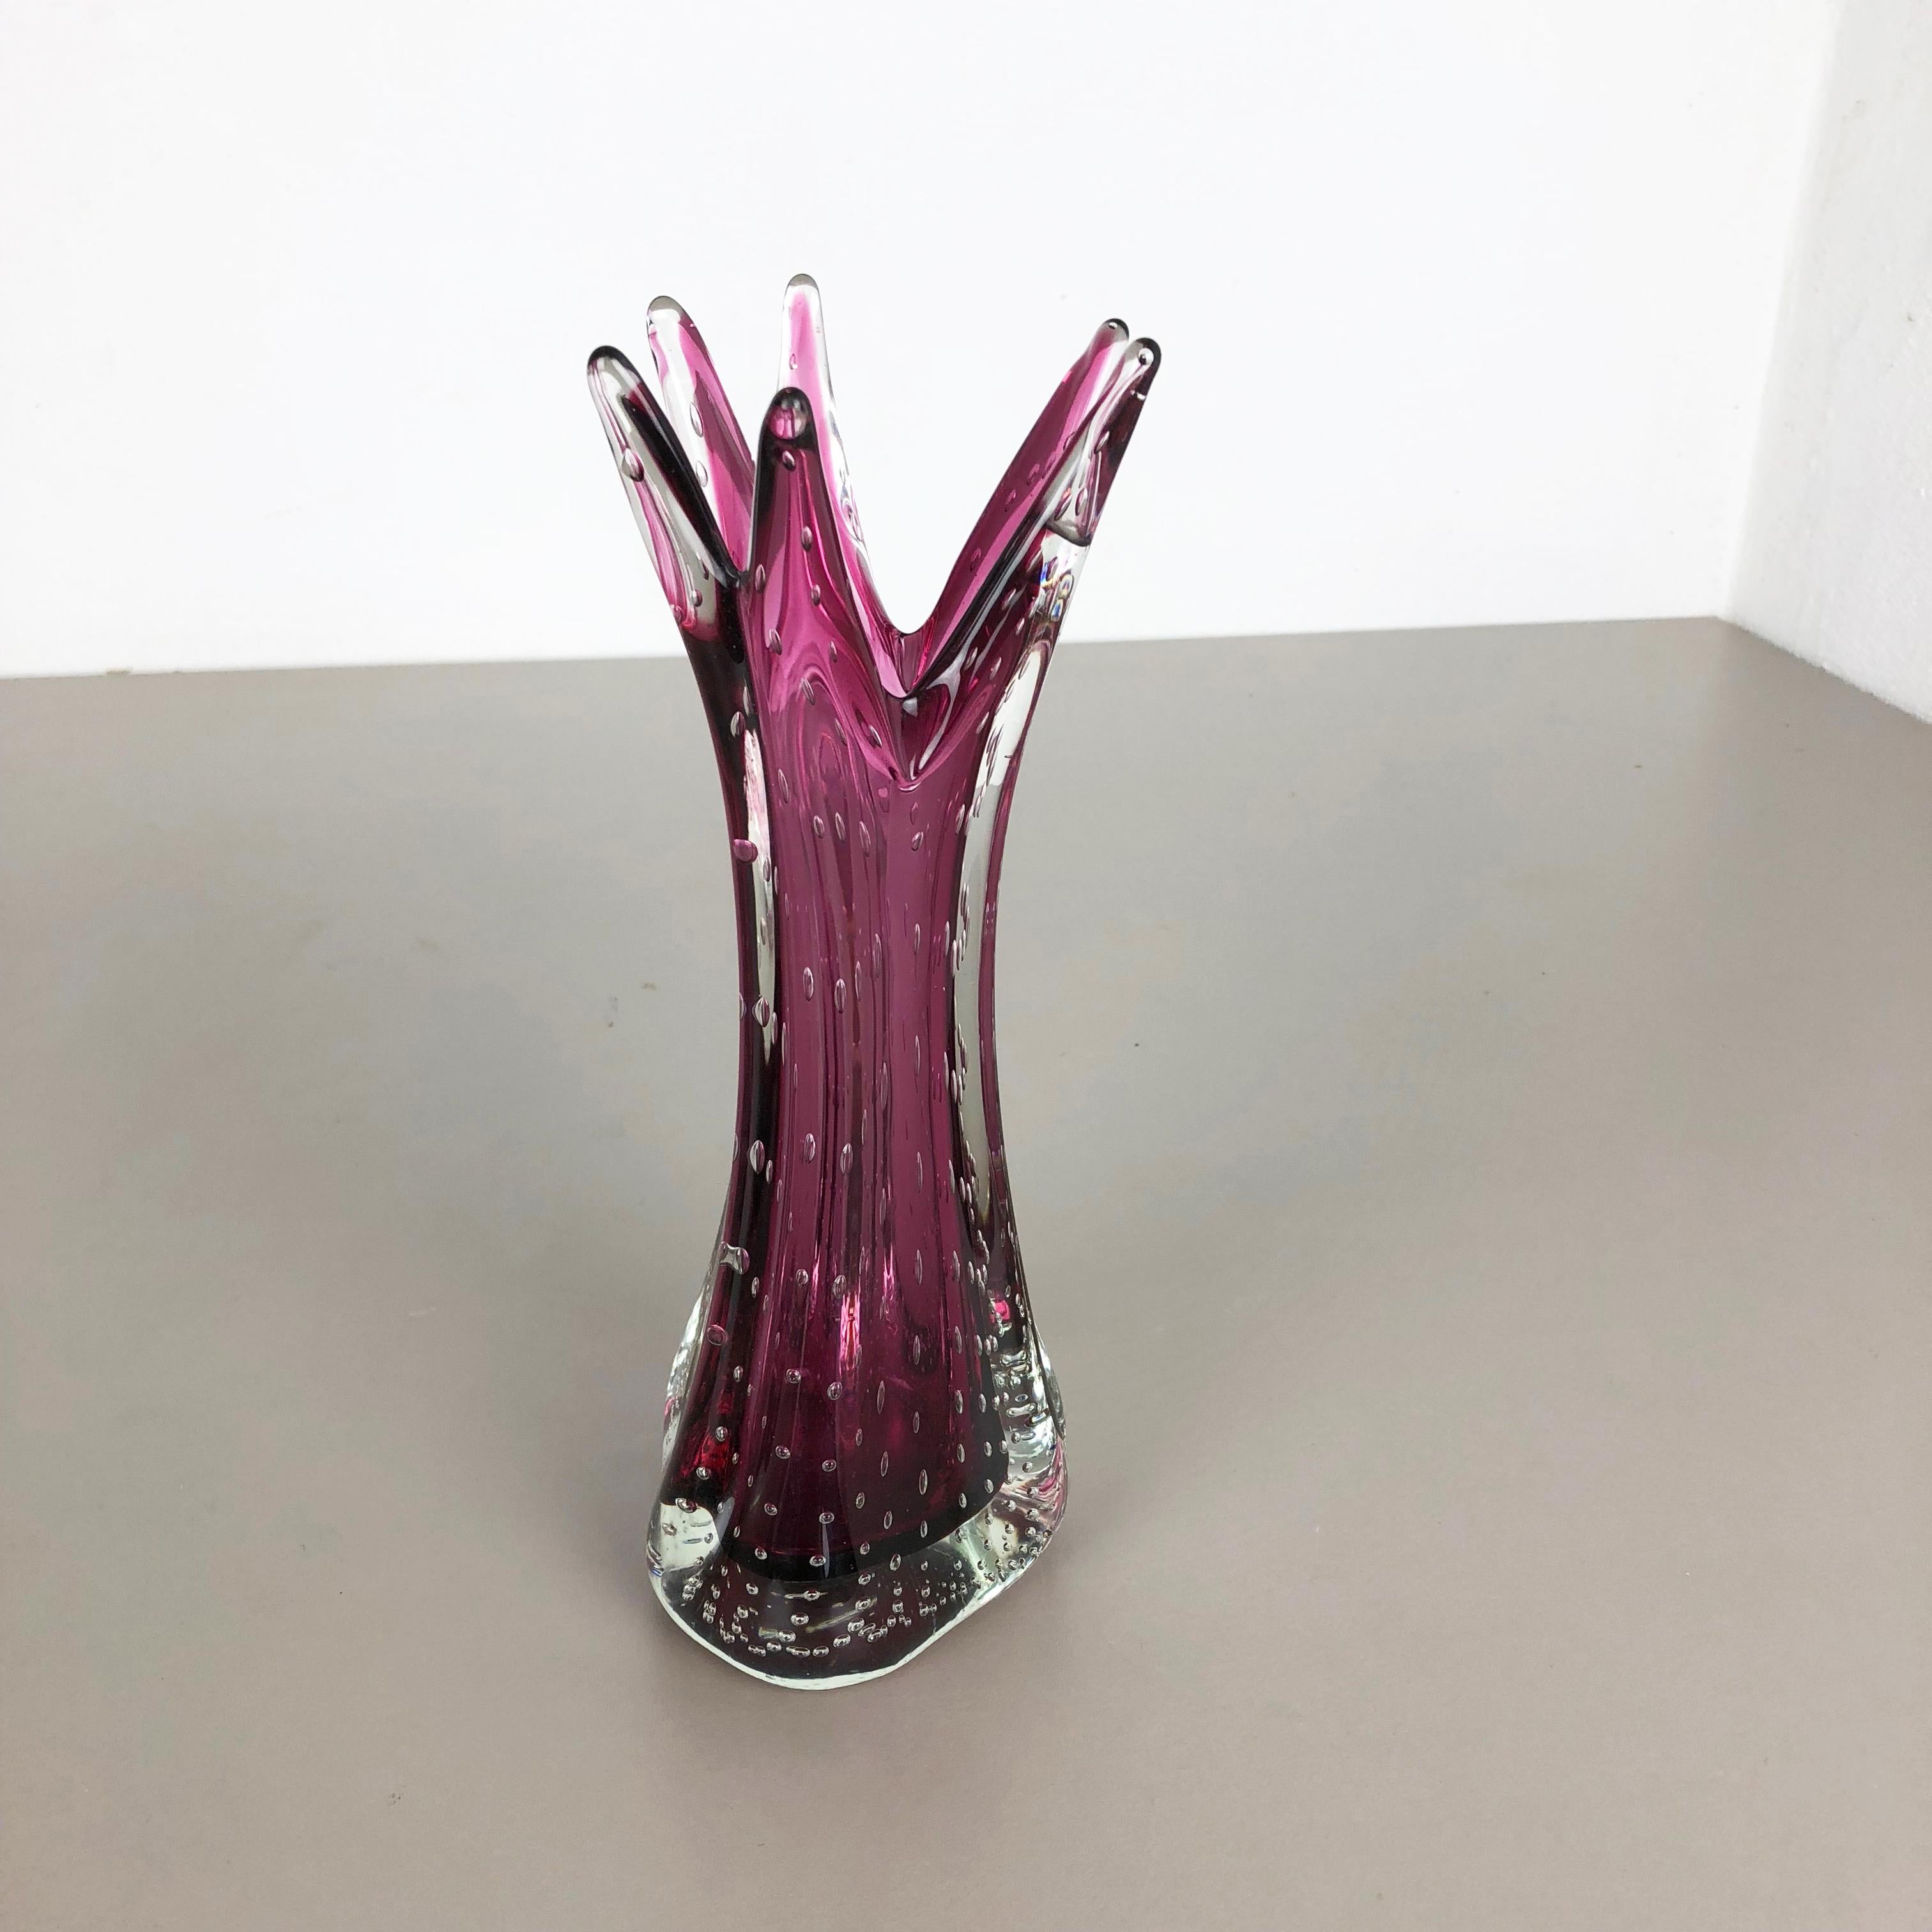 Article:

Murano glass vase element

Origin:

Murano, Italy


Decade:

1970s


This original glass vase was produced in the 1970s in Murano, Italy. An elegant pink Murano glass vase utilizing the bullicante technique of controlled